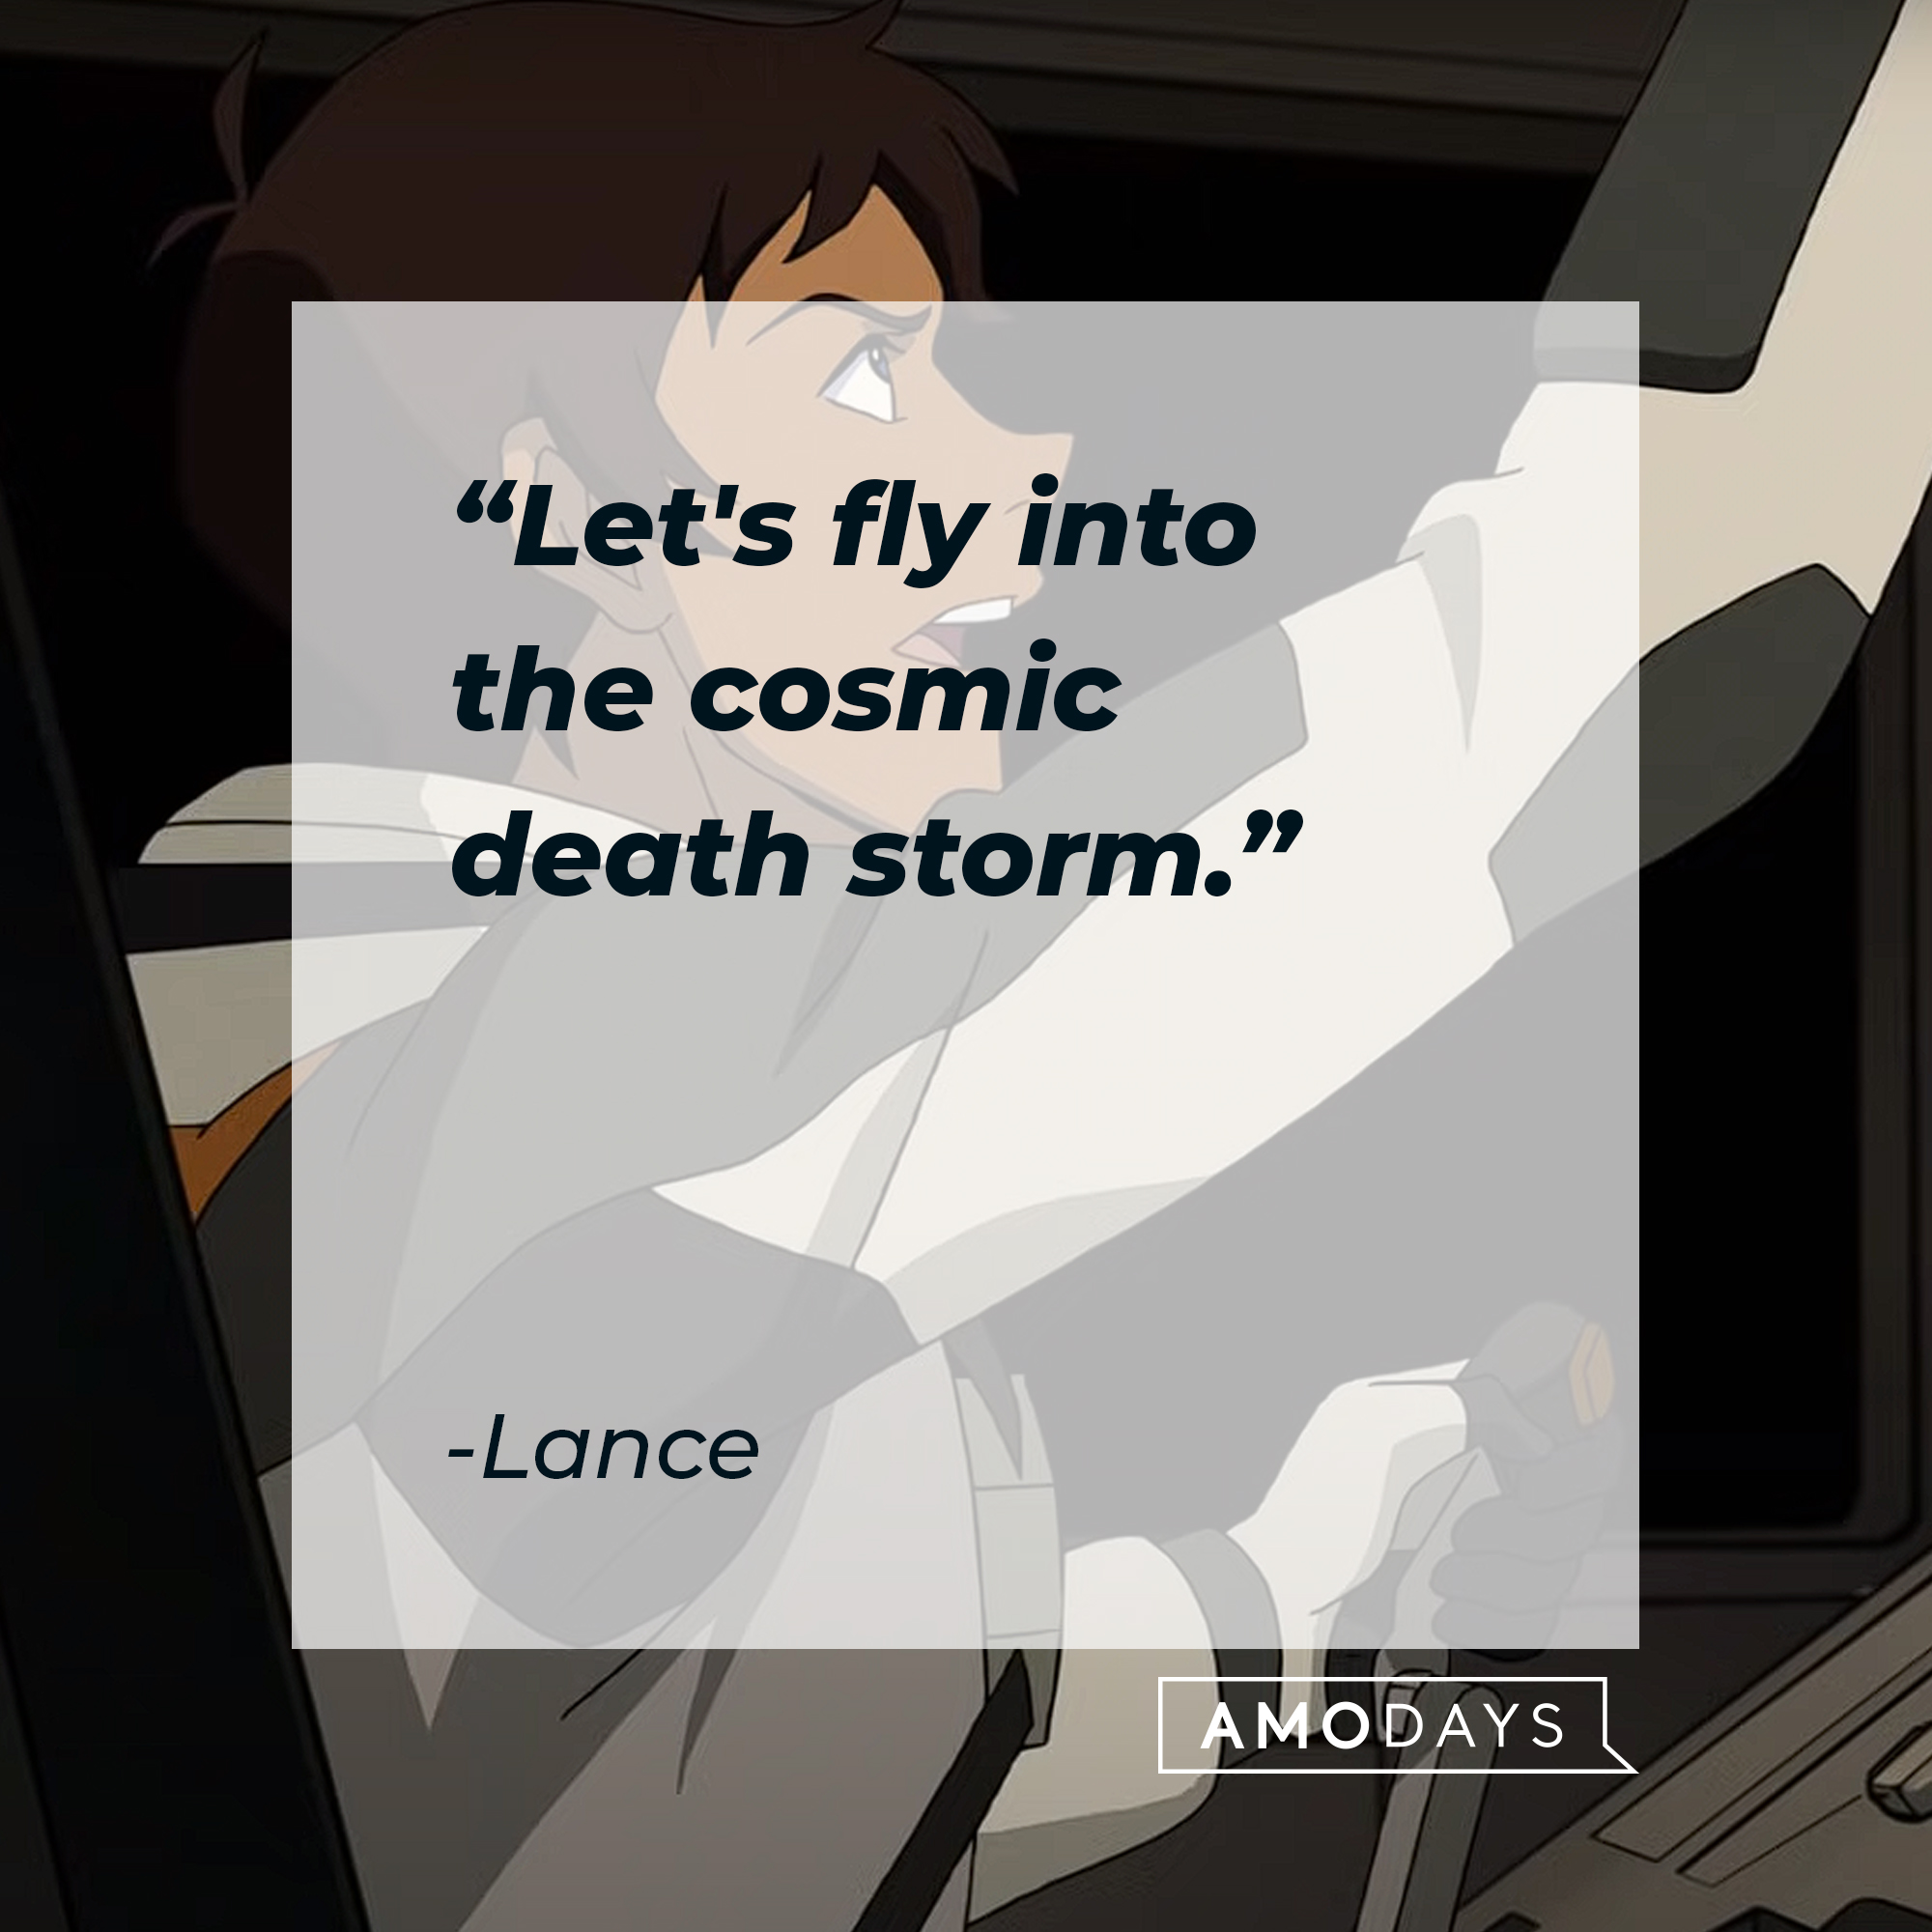 Lance's quote: "Let's fly into the cosmic death storm." | Source: youtube.com/netflixafterschool